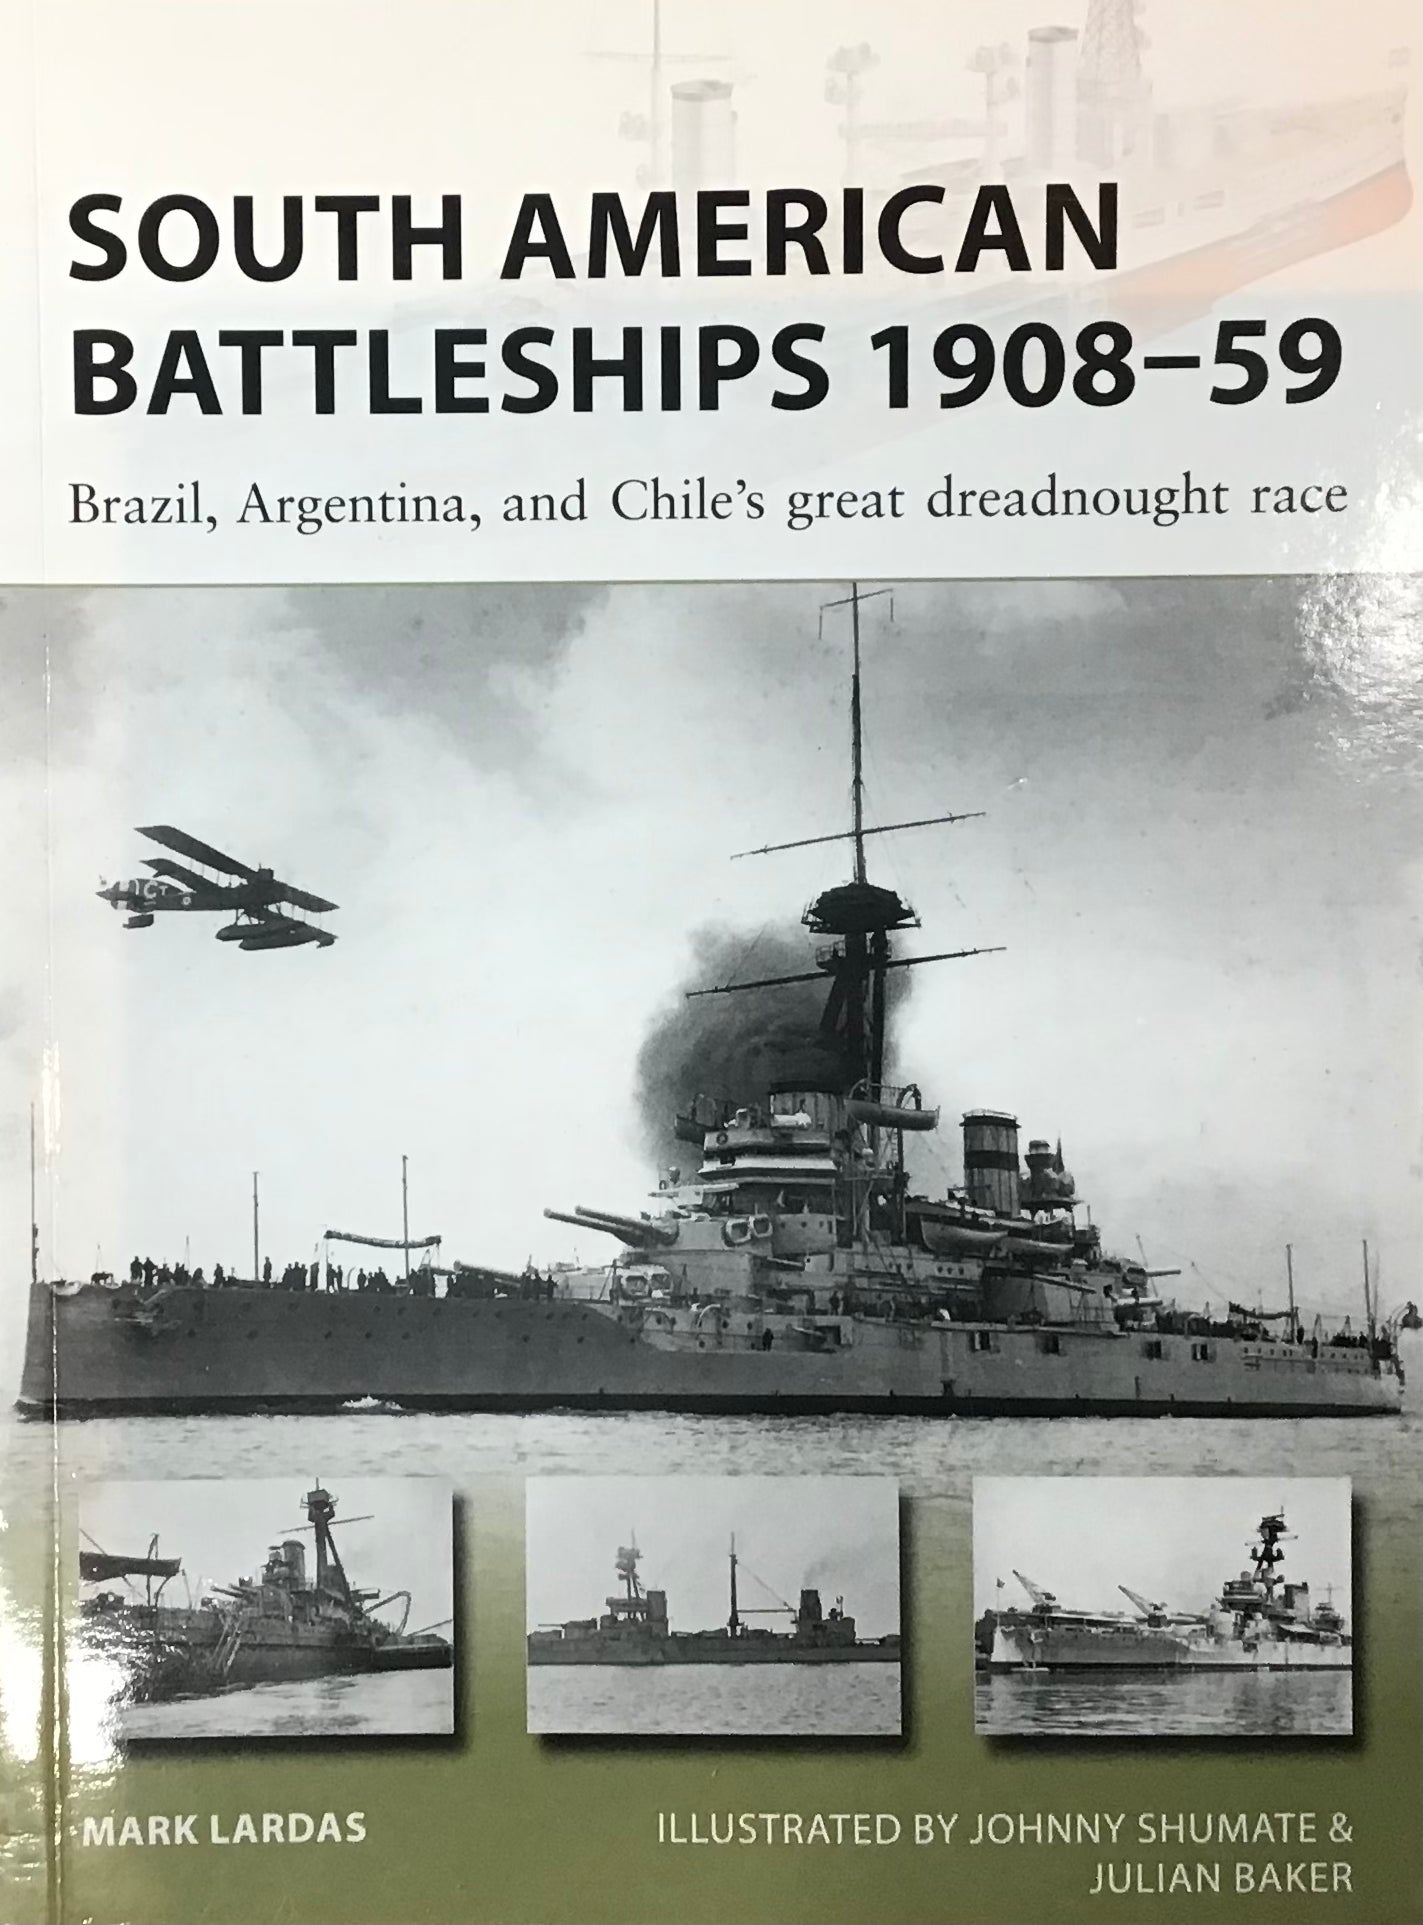 South American Battleships 1908-59: Brazil, Argentina and Chile's Great Dreadnought Race by Mark Lardas - Chester Model Centre